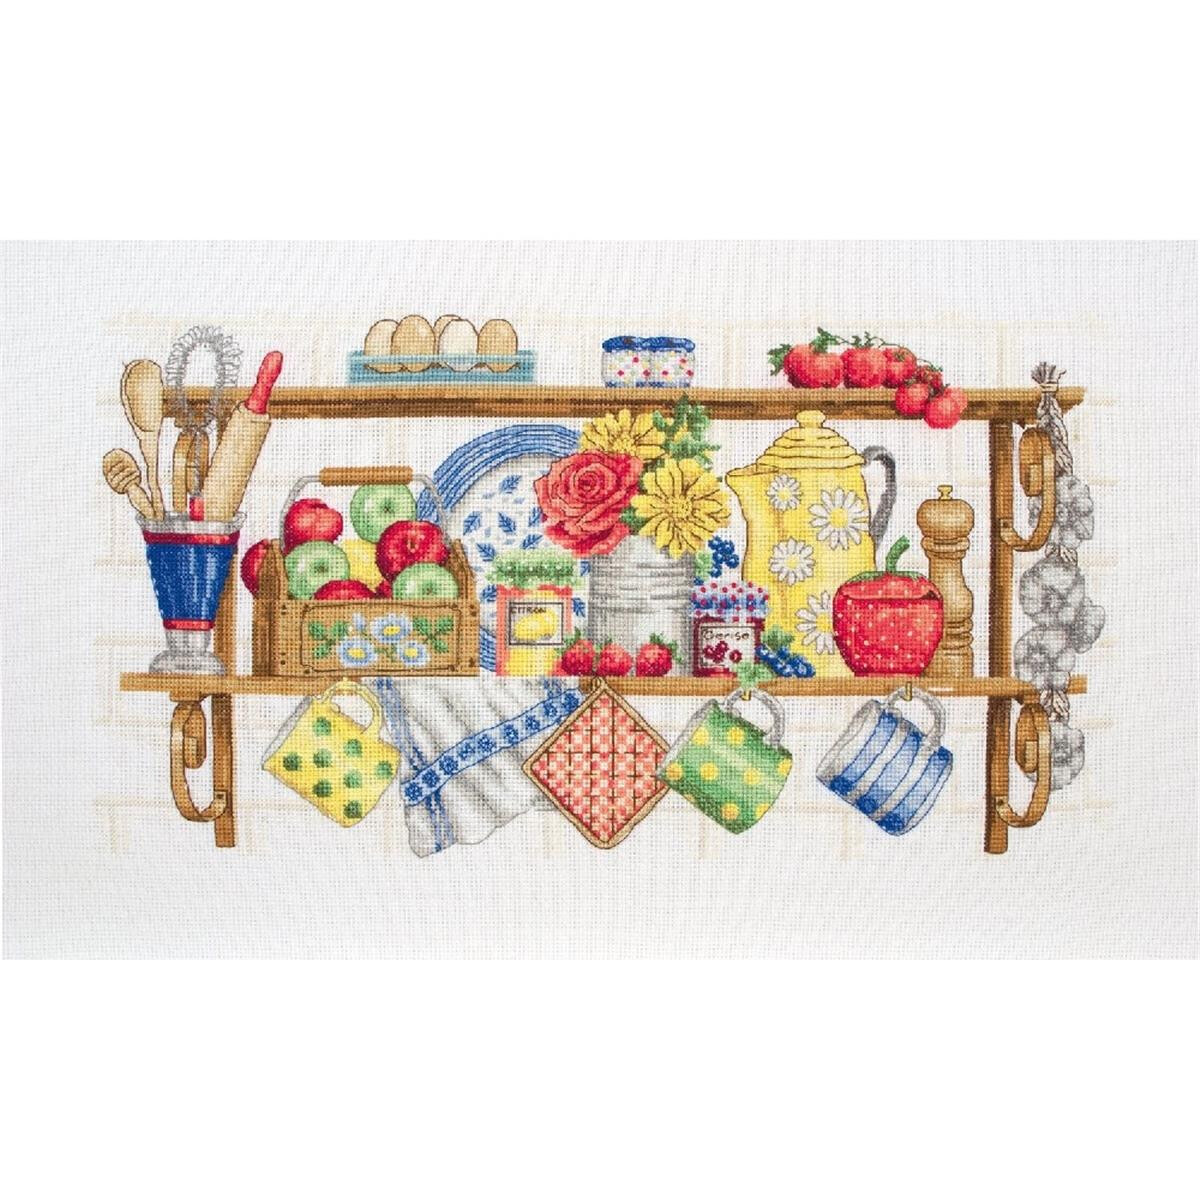 Anchor counted Cross Stitch kit "The kitchen...